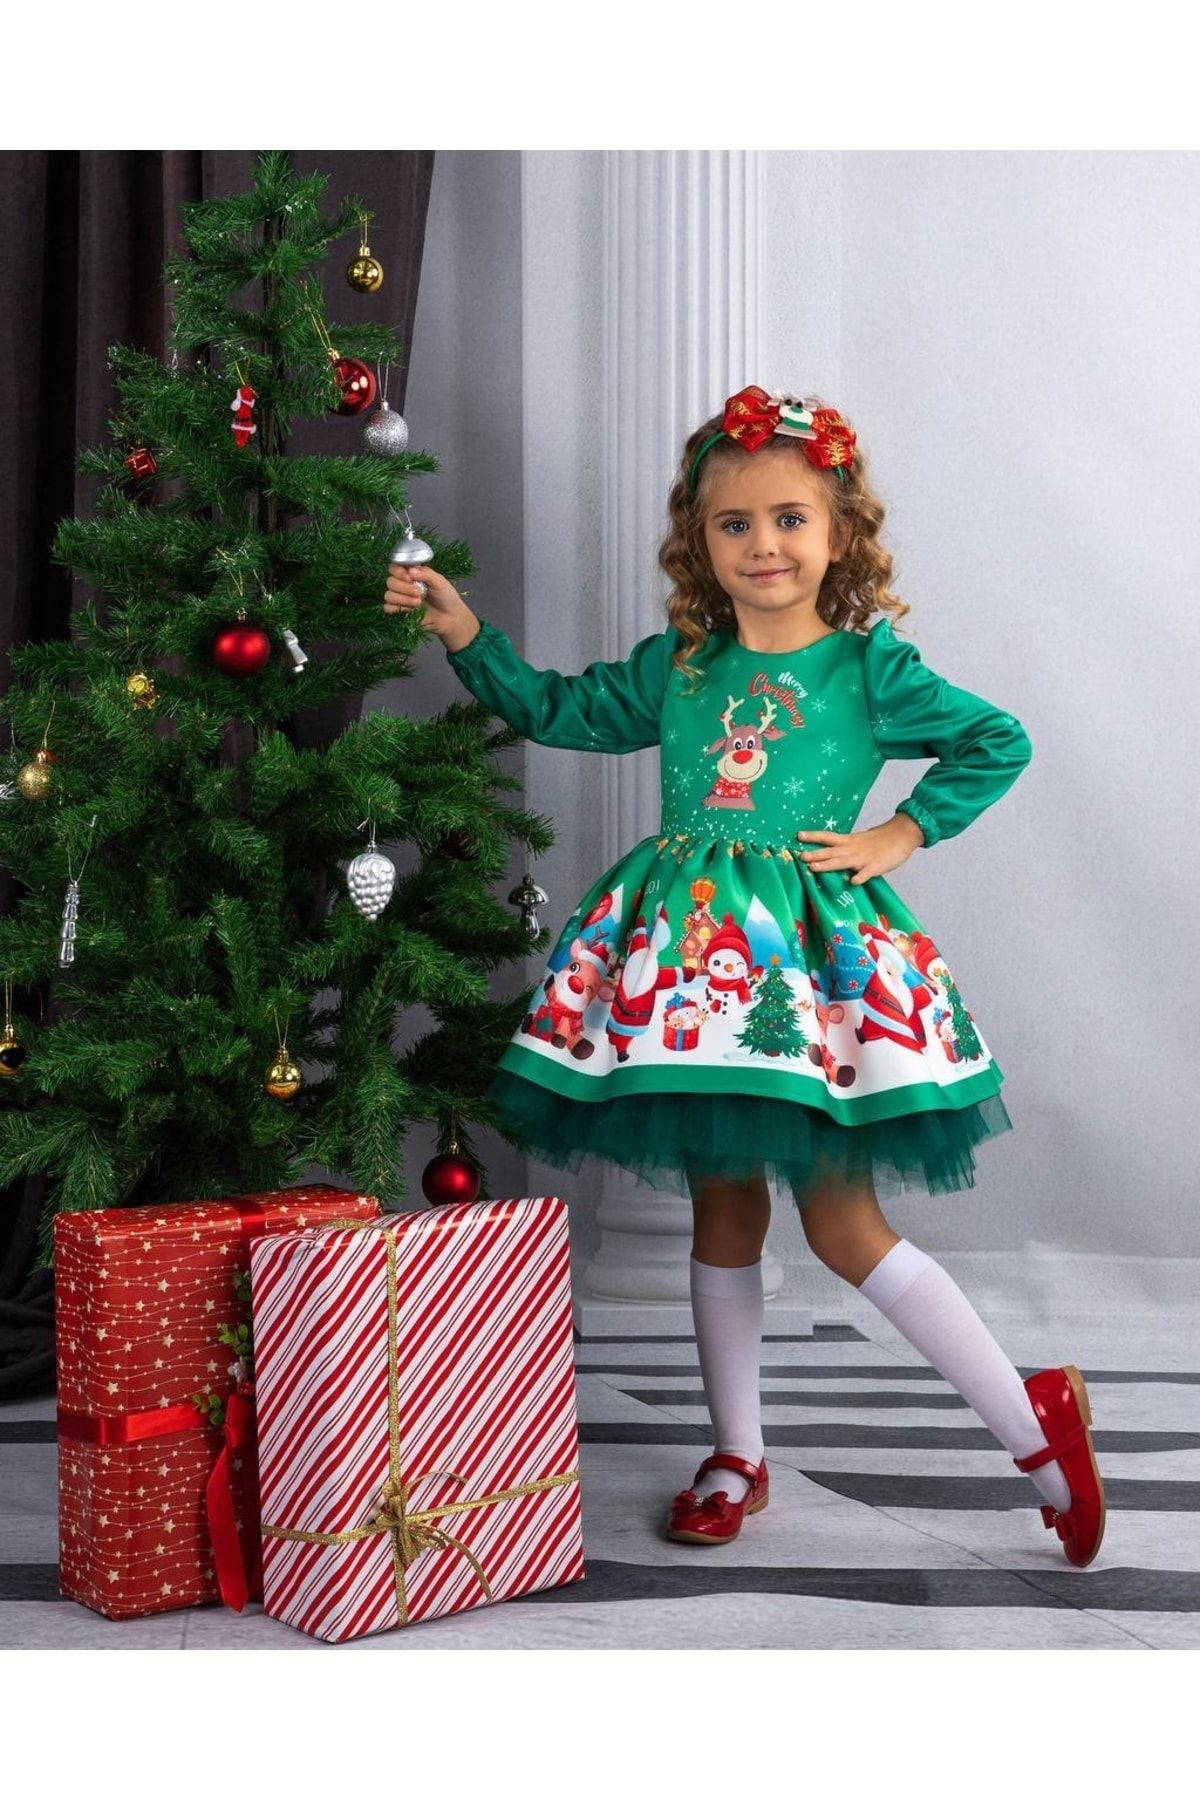 Ugly Christmas Dress for Girls,Christmas Party Dress - Swing Dress Waist  Design, Short Sleeve for Christmas Party, Holiday Celebration Yjyq, s :  Amazon.nl: Fashion